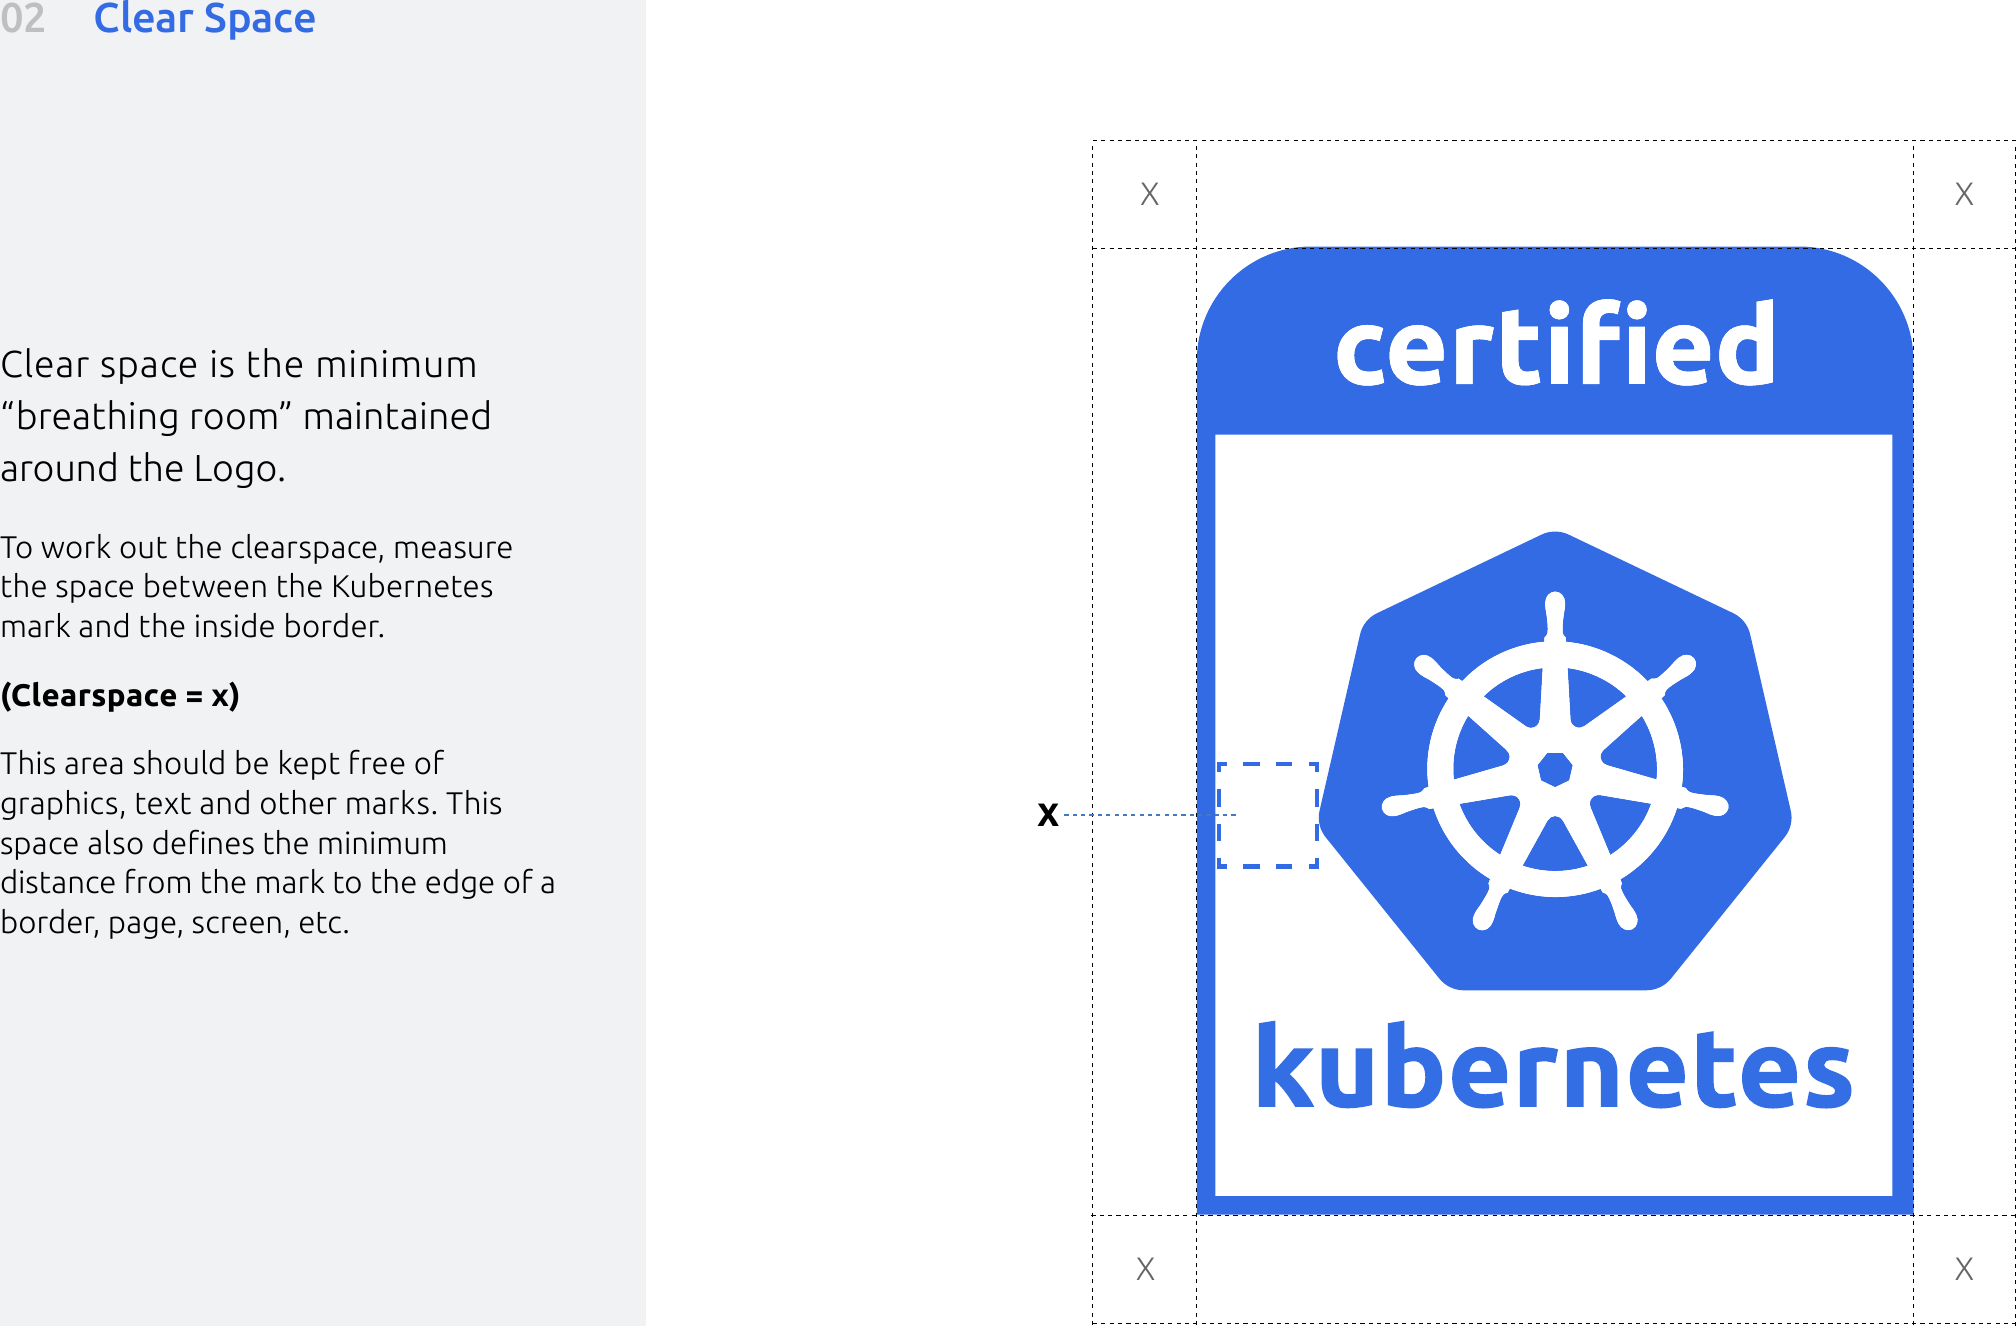 Page 6 of 9 - Certified-kubernetes-brand-guide